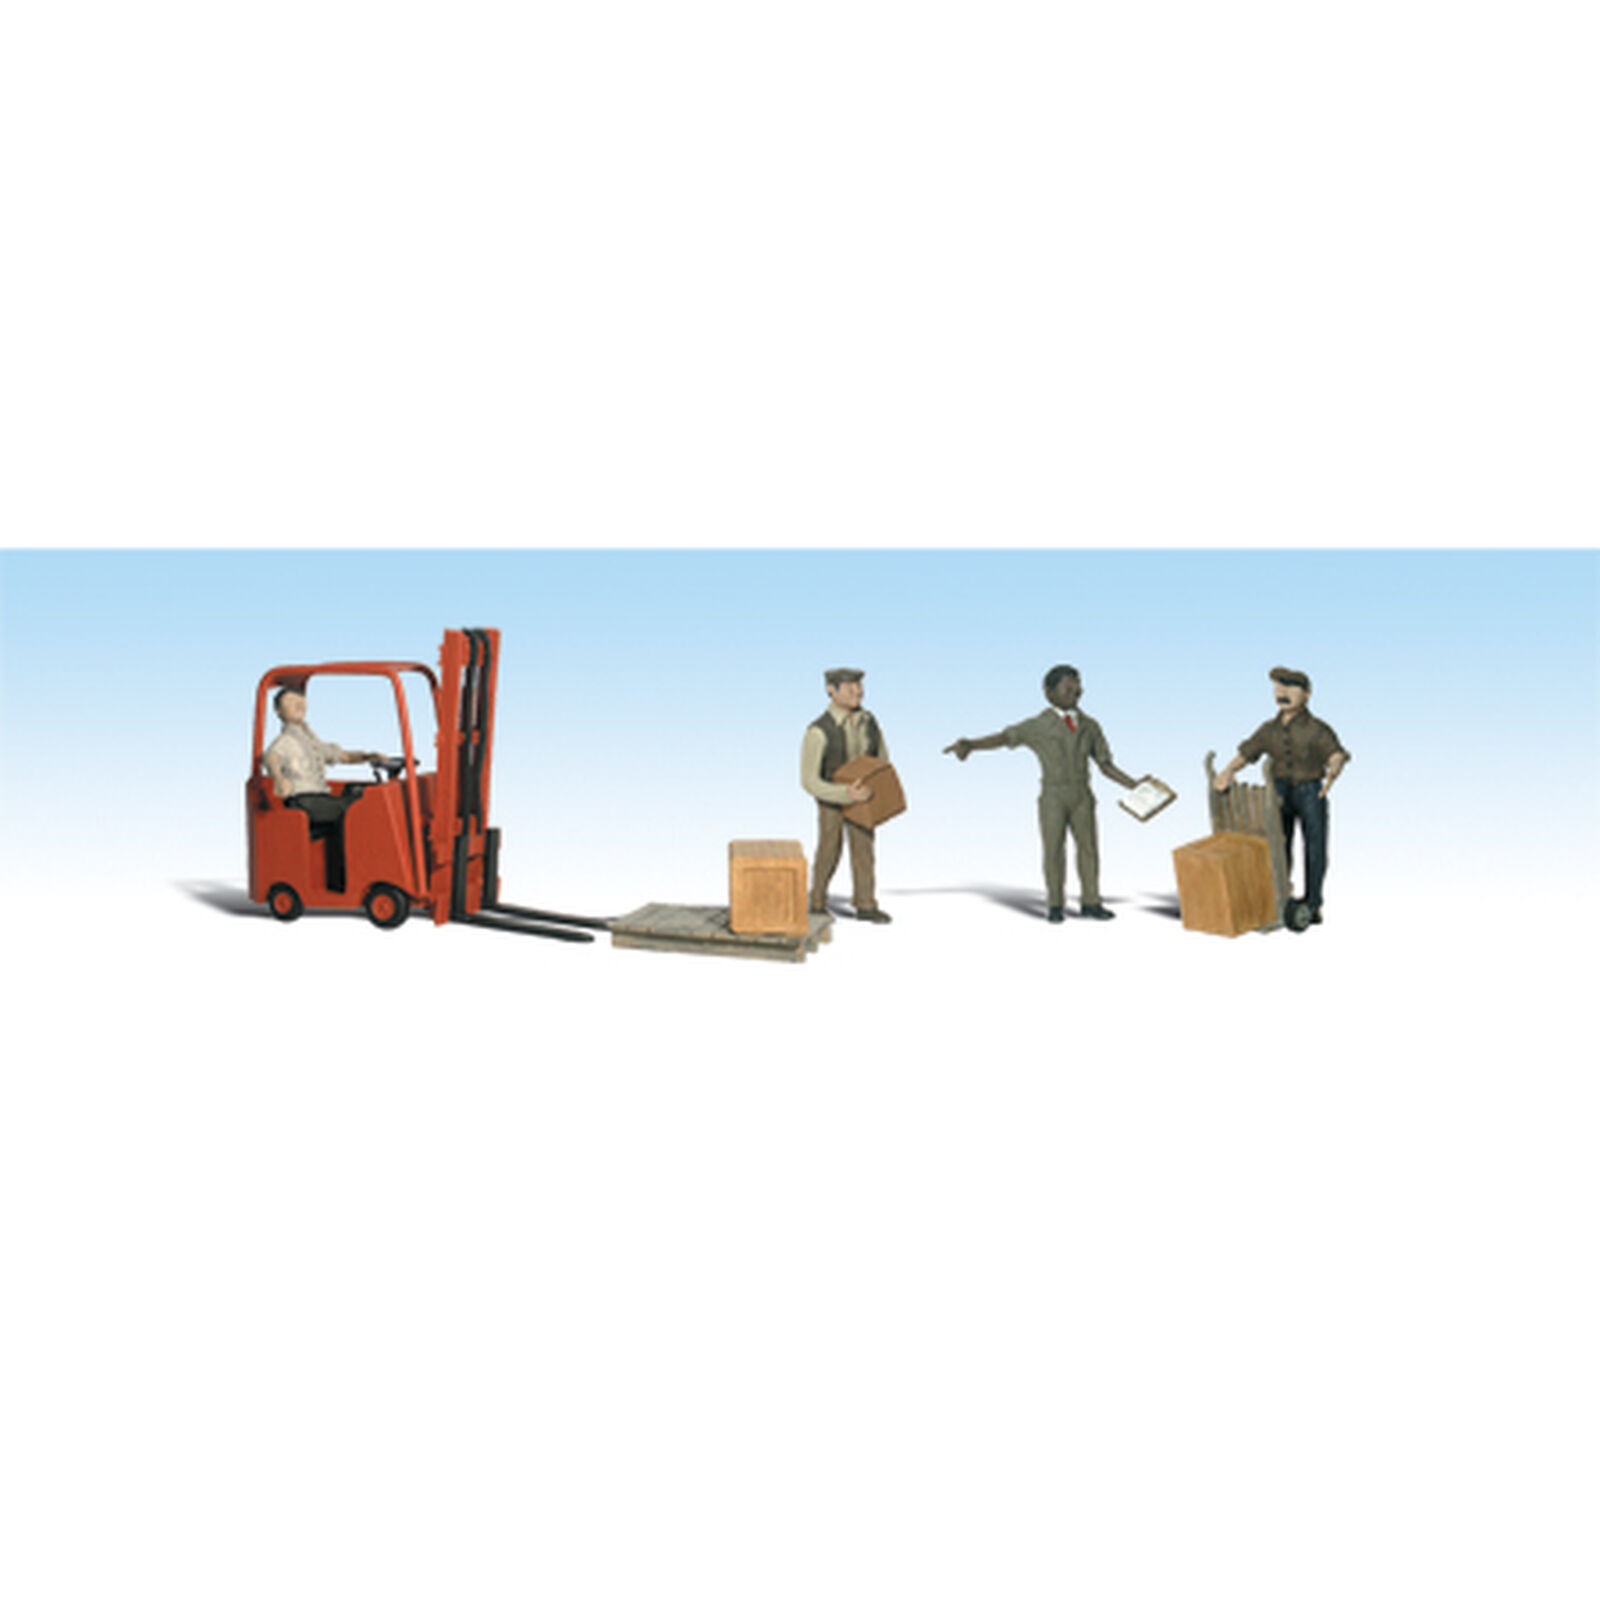 HO Workers with Forklift